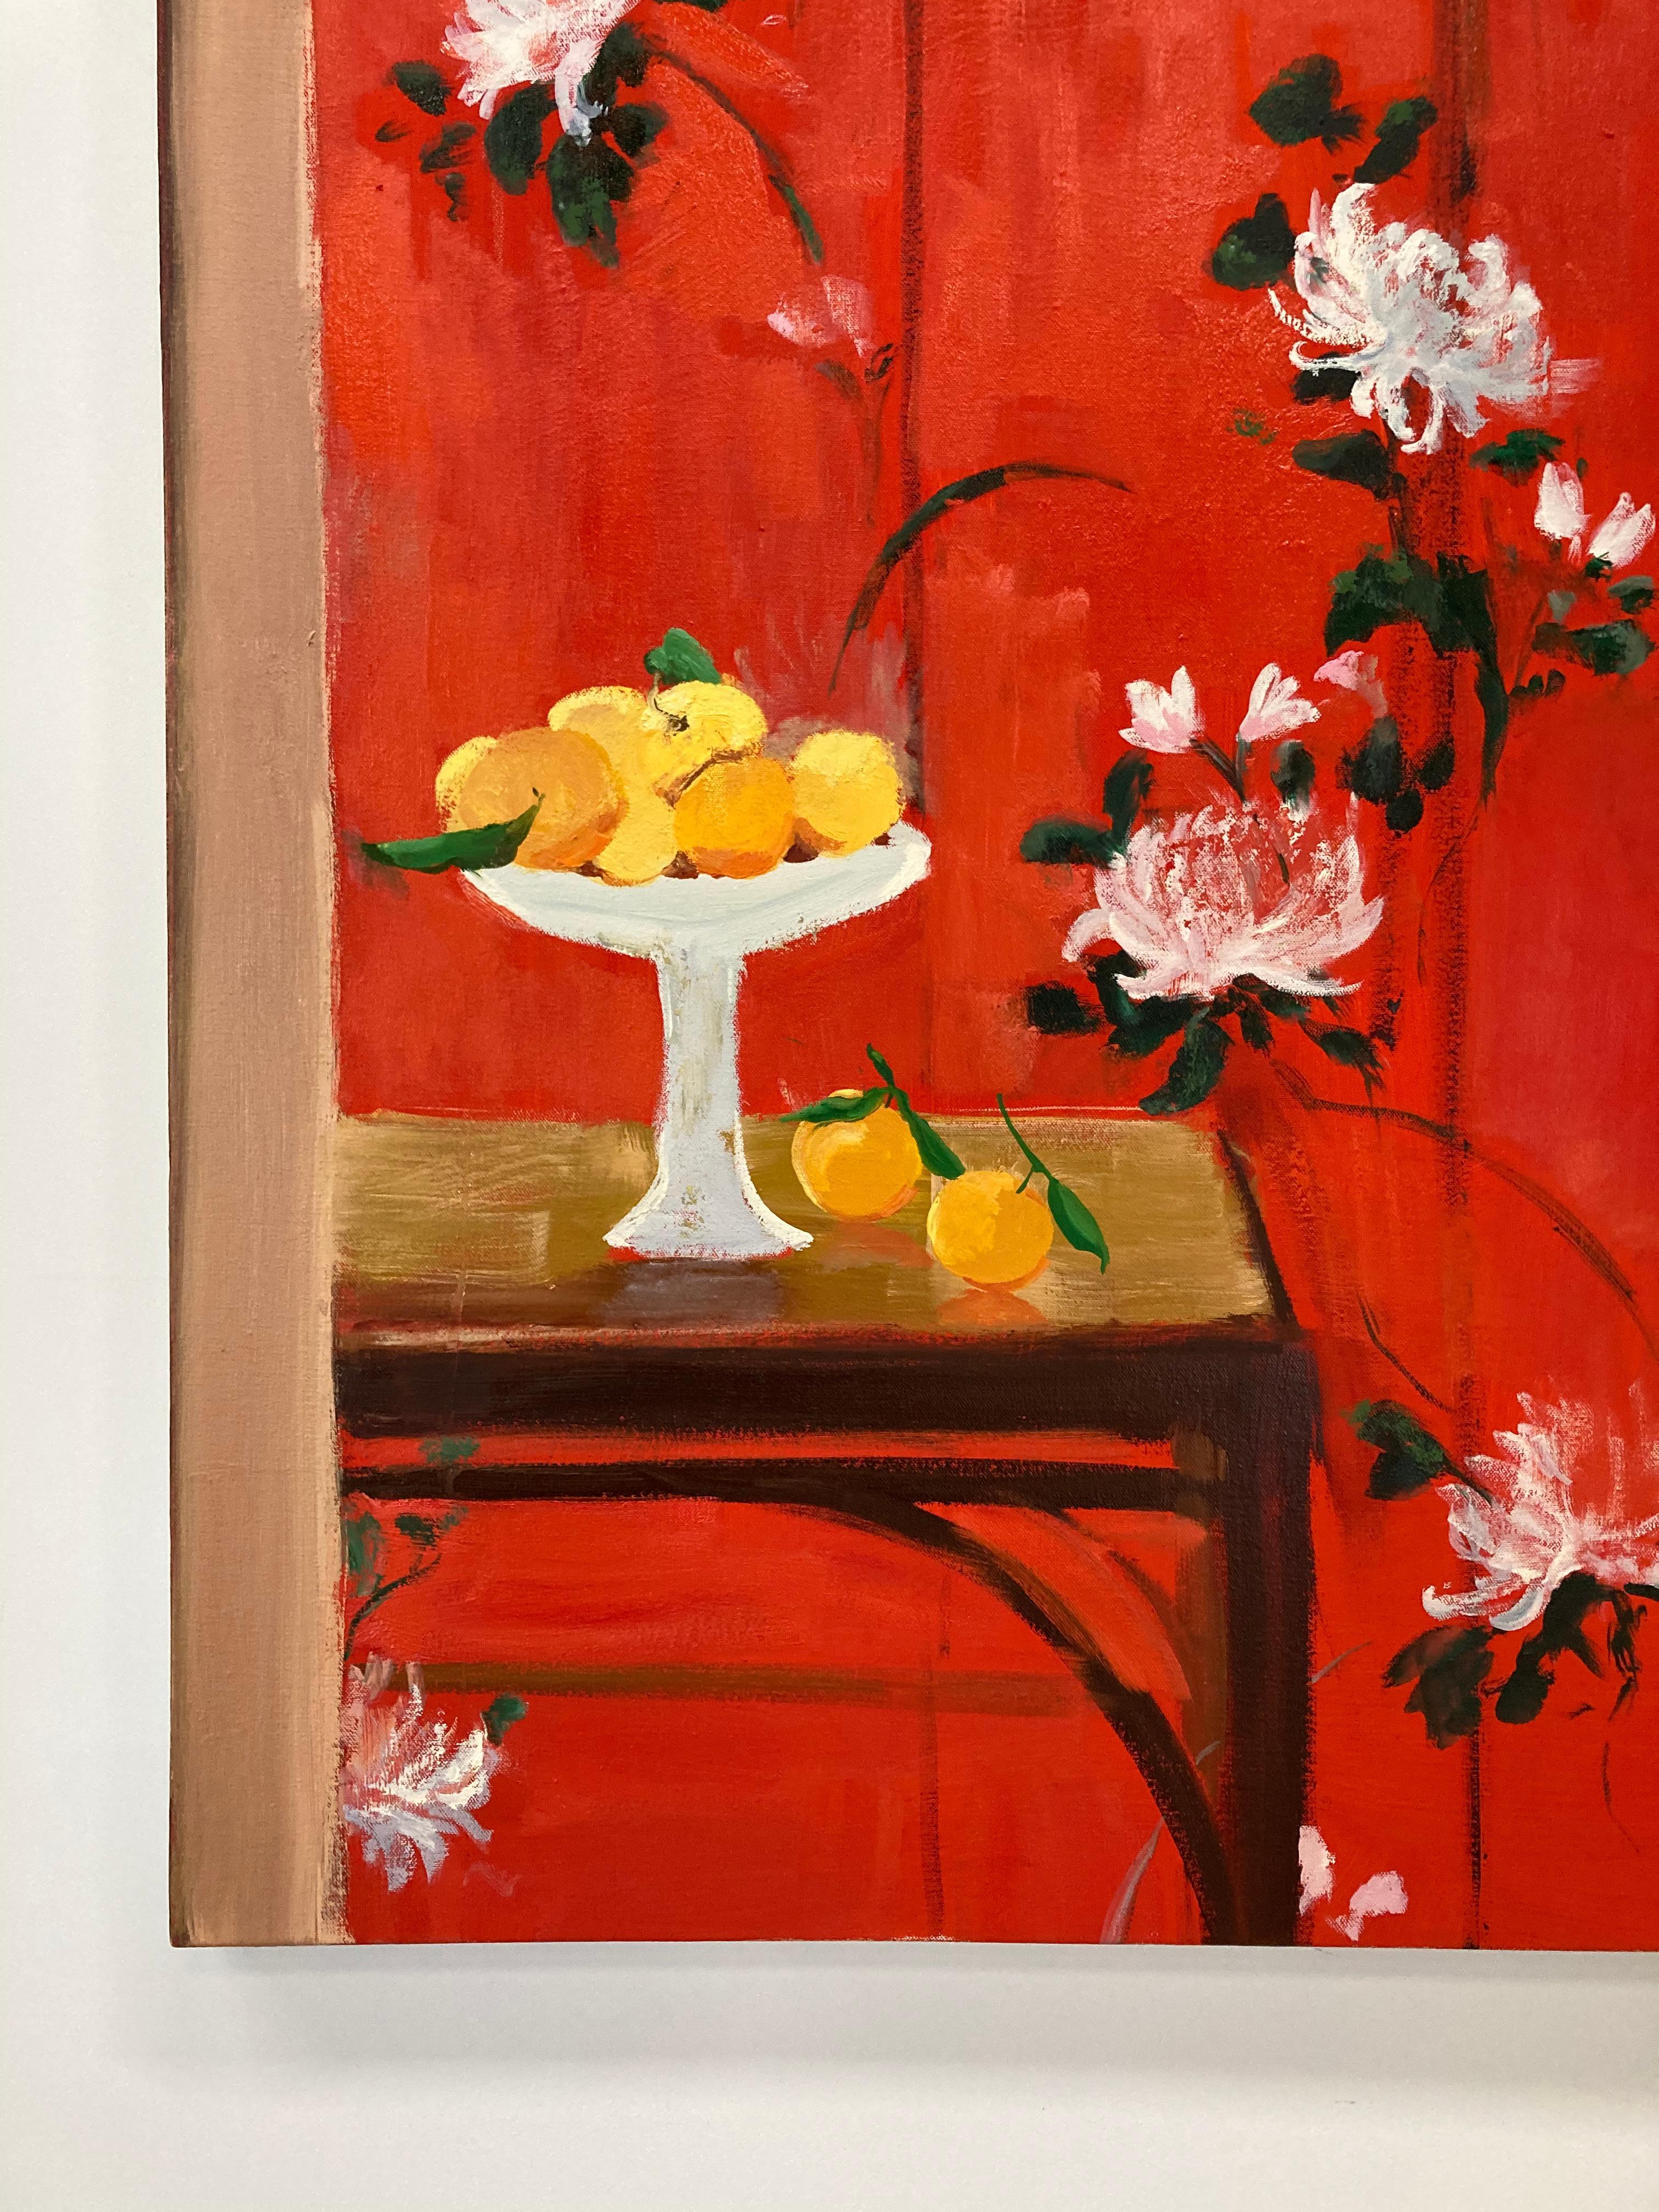 Orange Spice, Bright Red Vertical Botanical Still Life, Fruits, White Flowers - Contemporary Painting by Melanie Parke